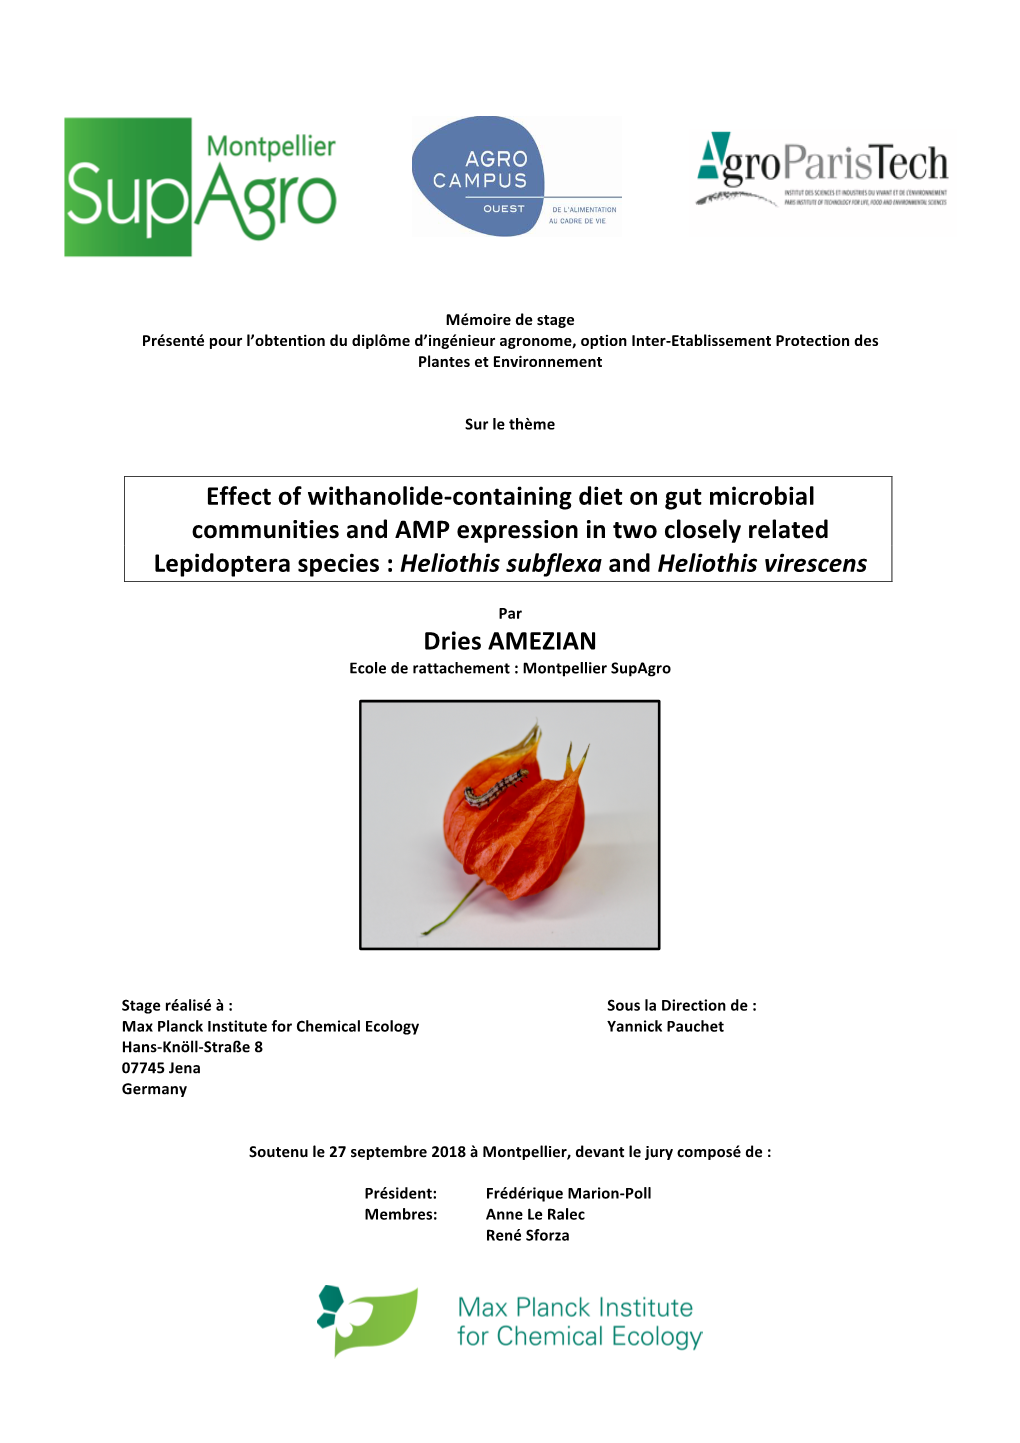 Effect of Withanolide-Containing Diet on Gut Microbial Communities and AMP Expression in Two Closely Related Lepidoptera Speci